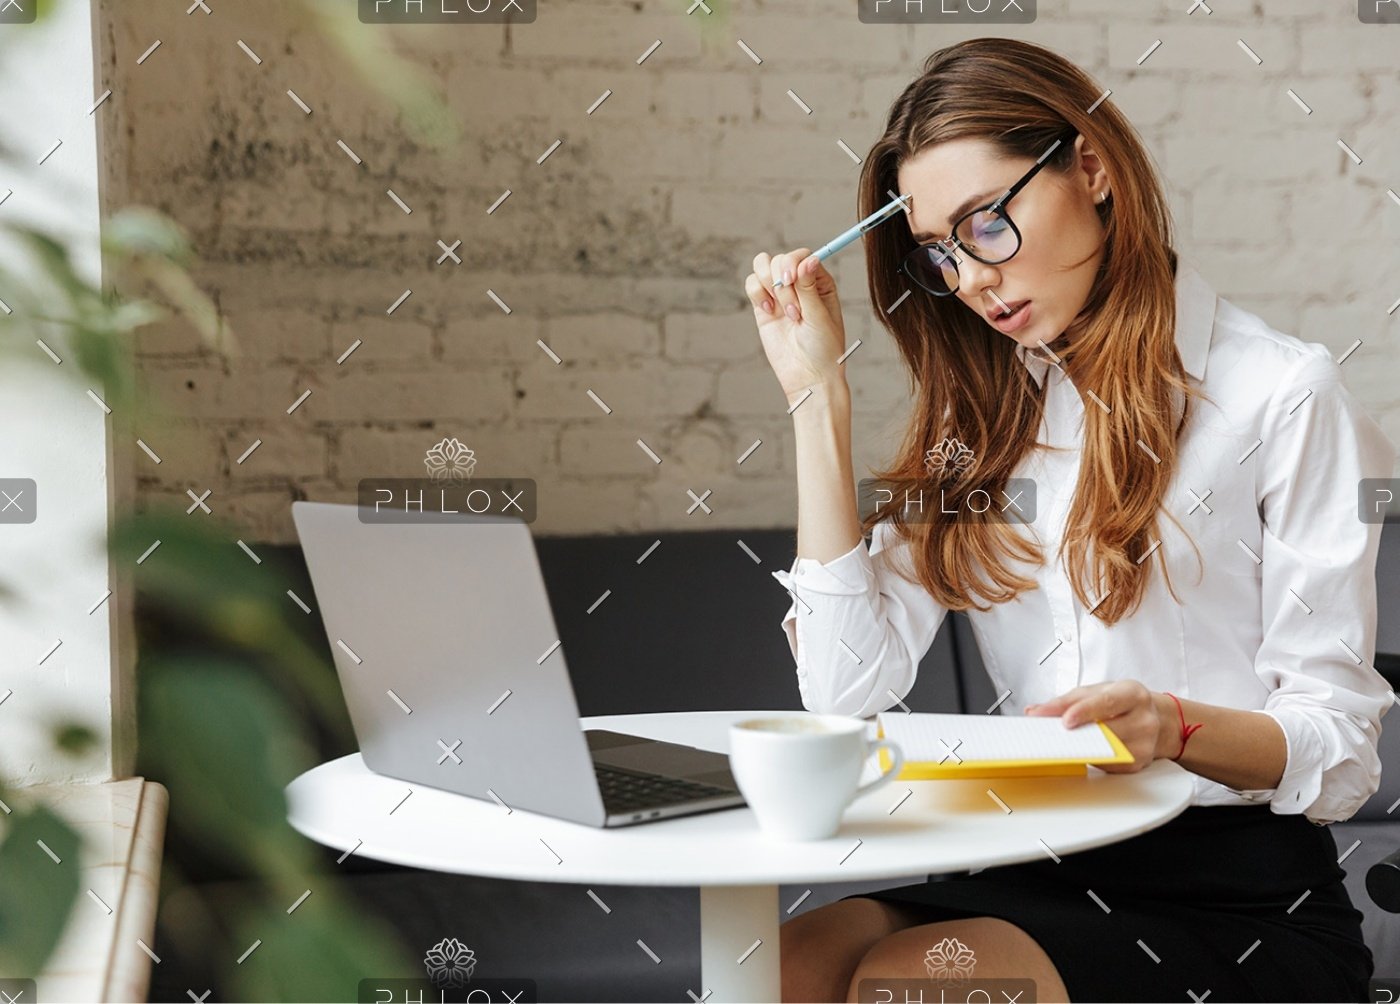 demo-attachment-1151-thoughtful-business-woman-indoors-using-laptop-P5HYUQX